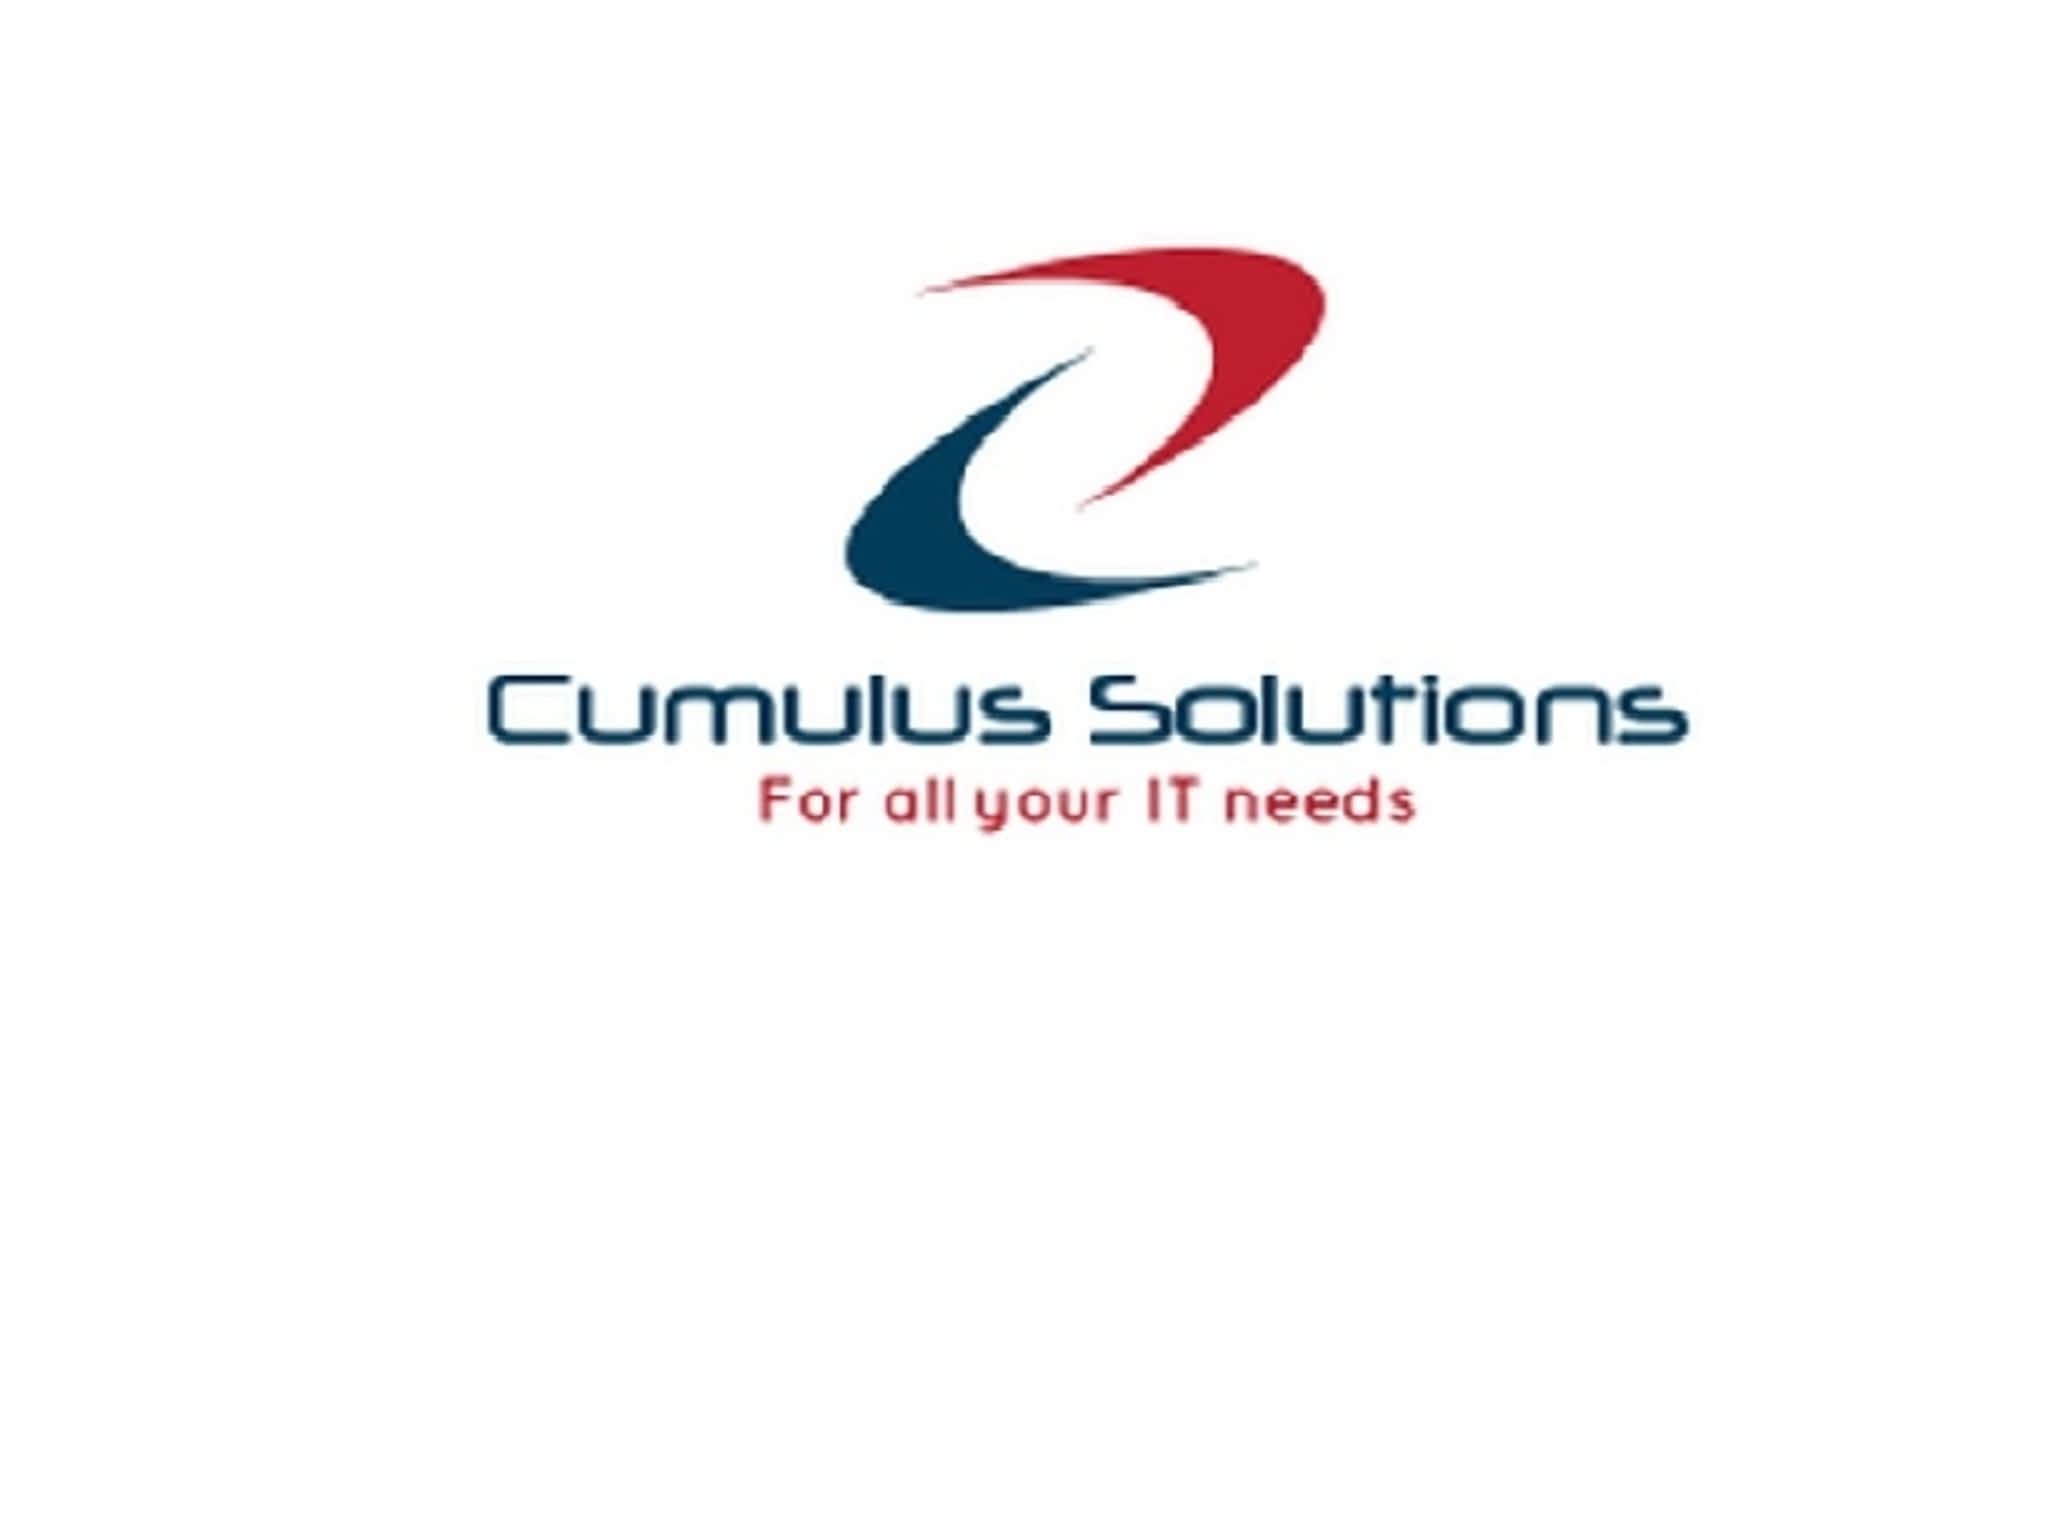 photo Cumulus Solutions - For all your IT needs